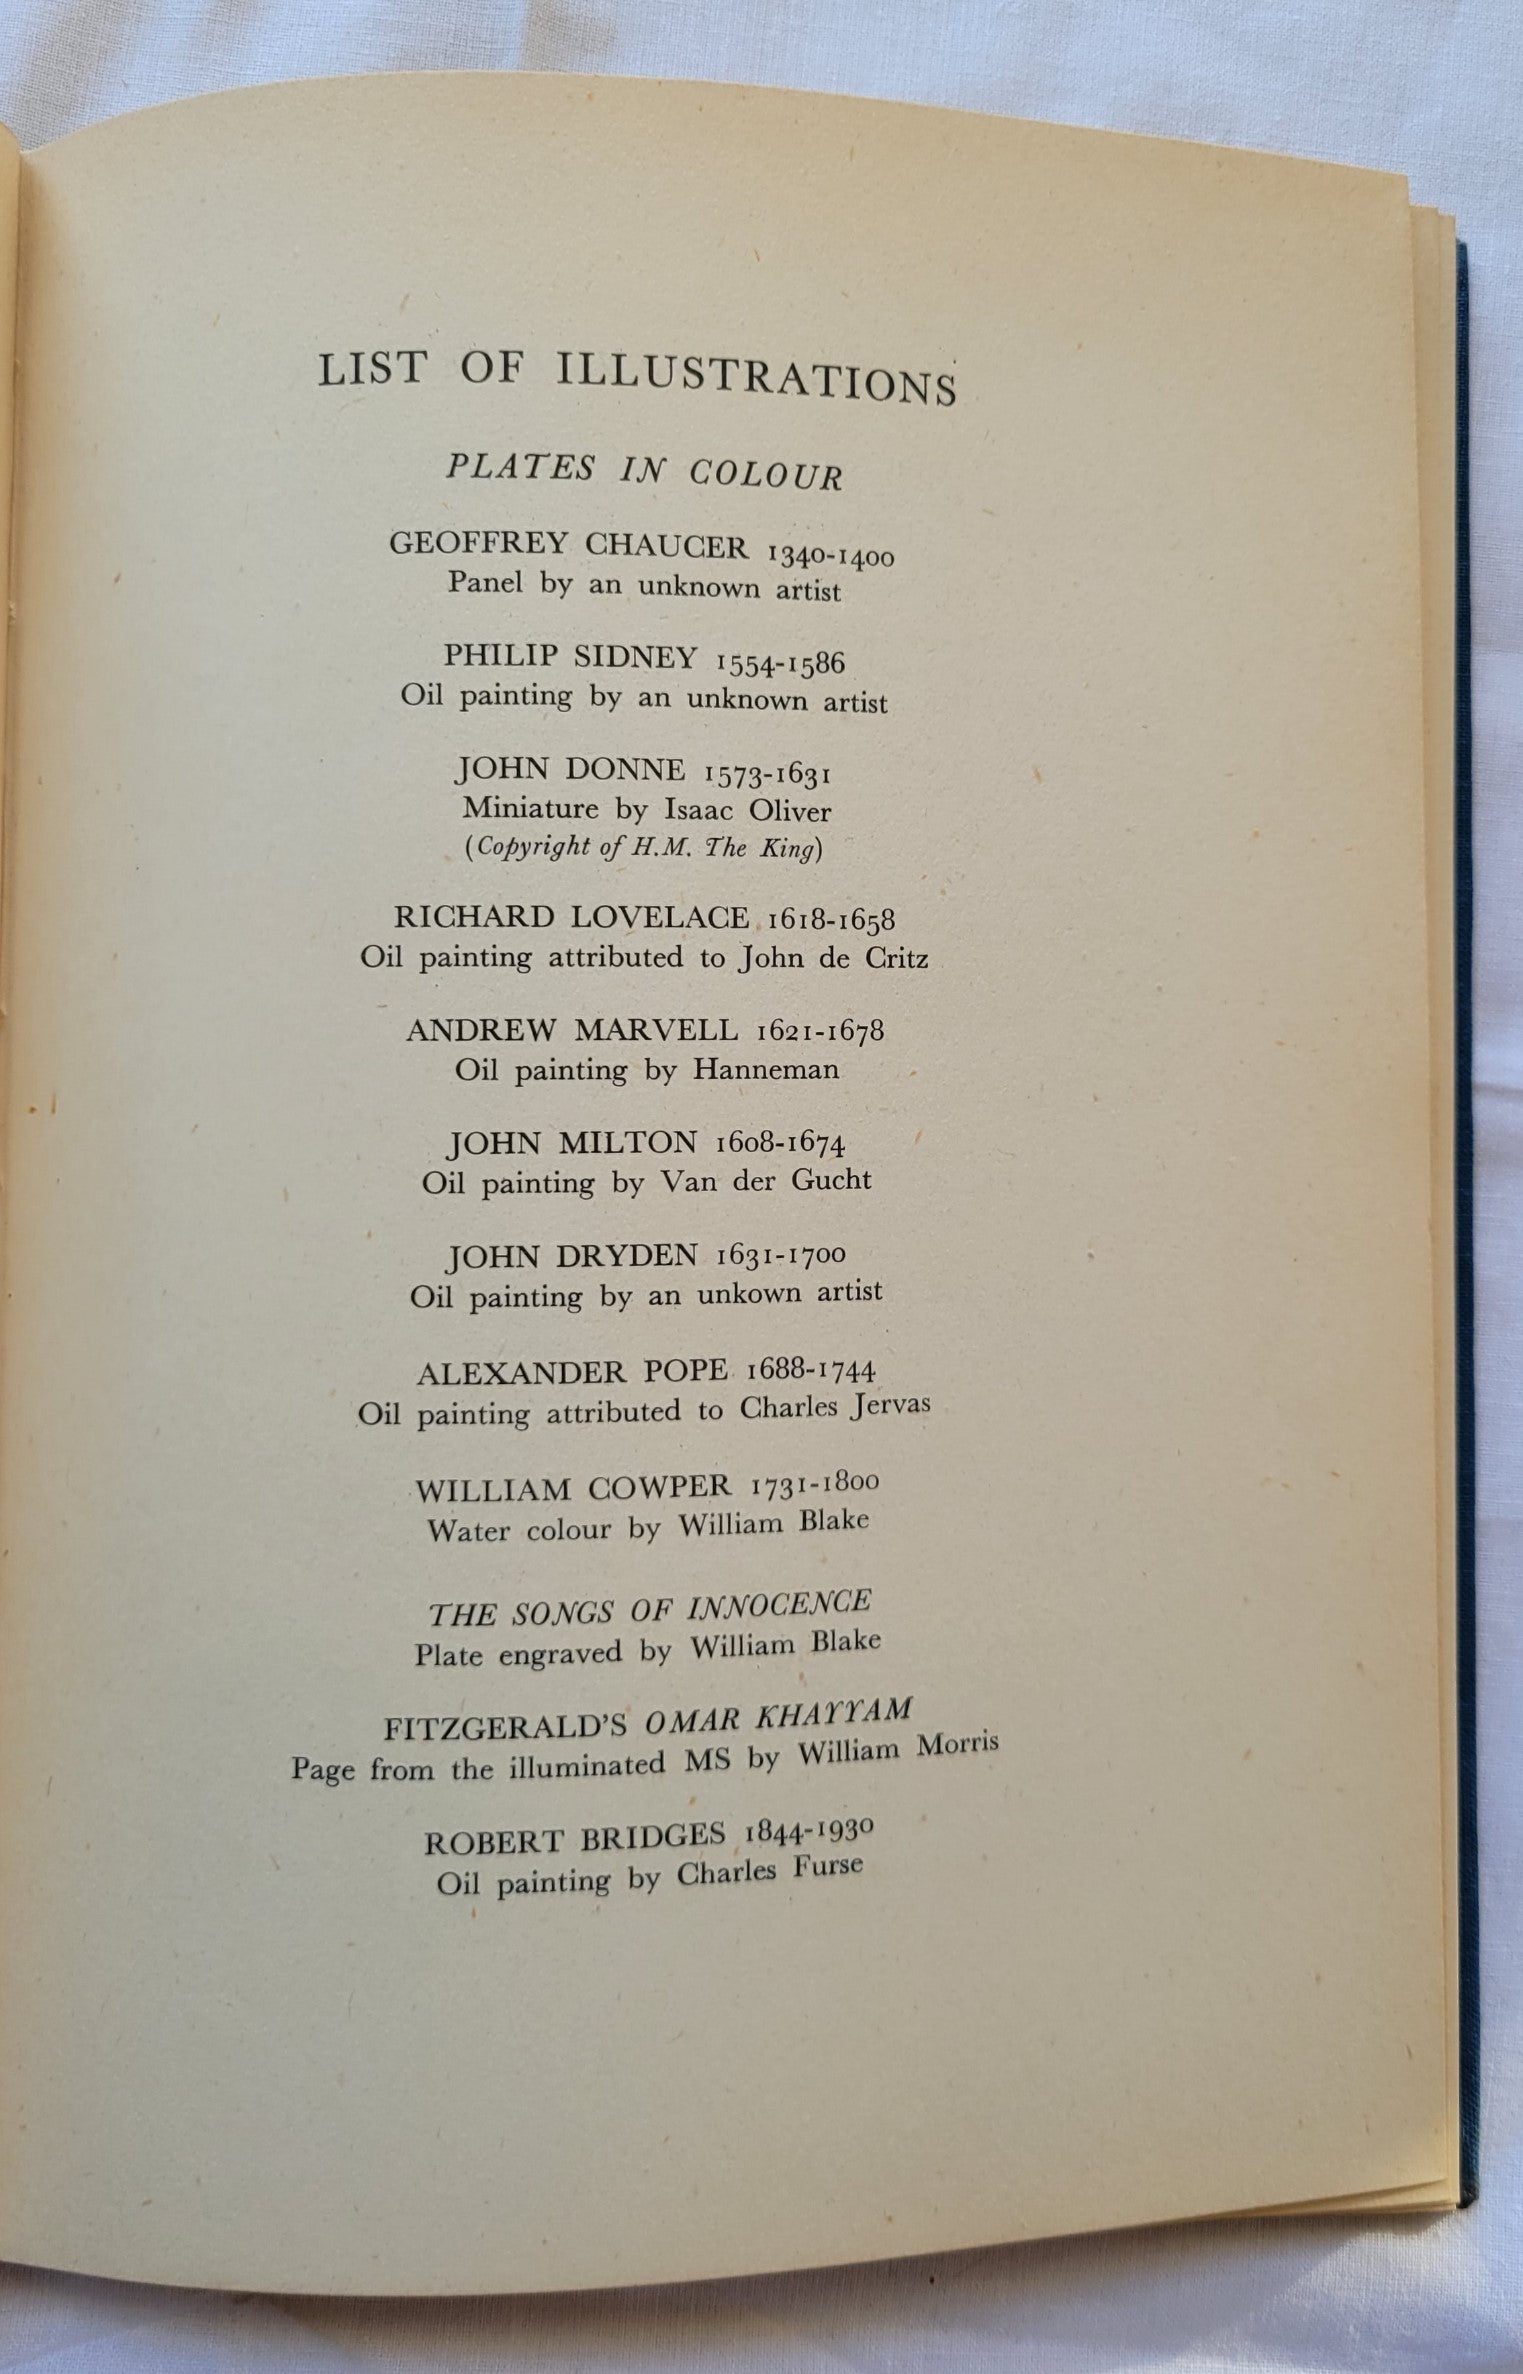 Vintage book for sale "The English Poets" by Lord David Cecil, published by Hastings House, 1940. List of illustrations.